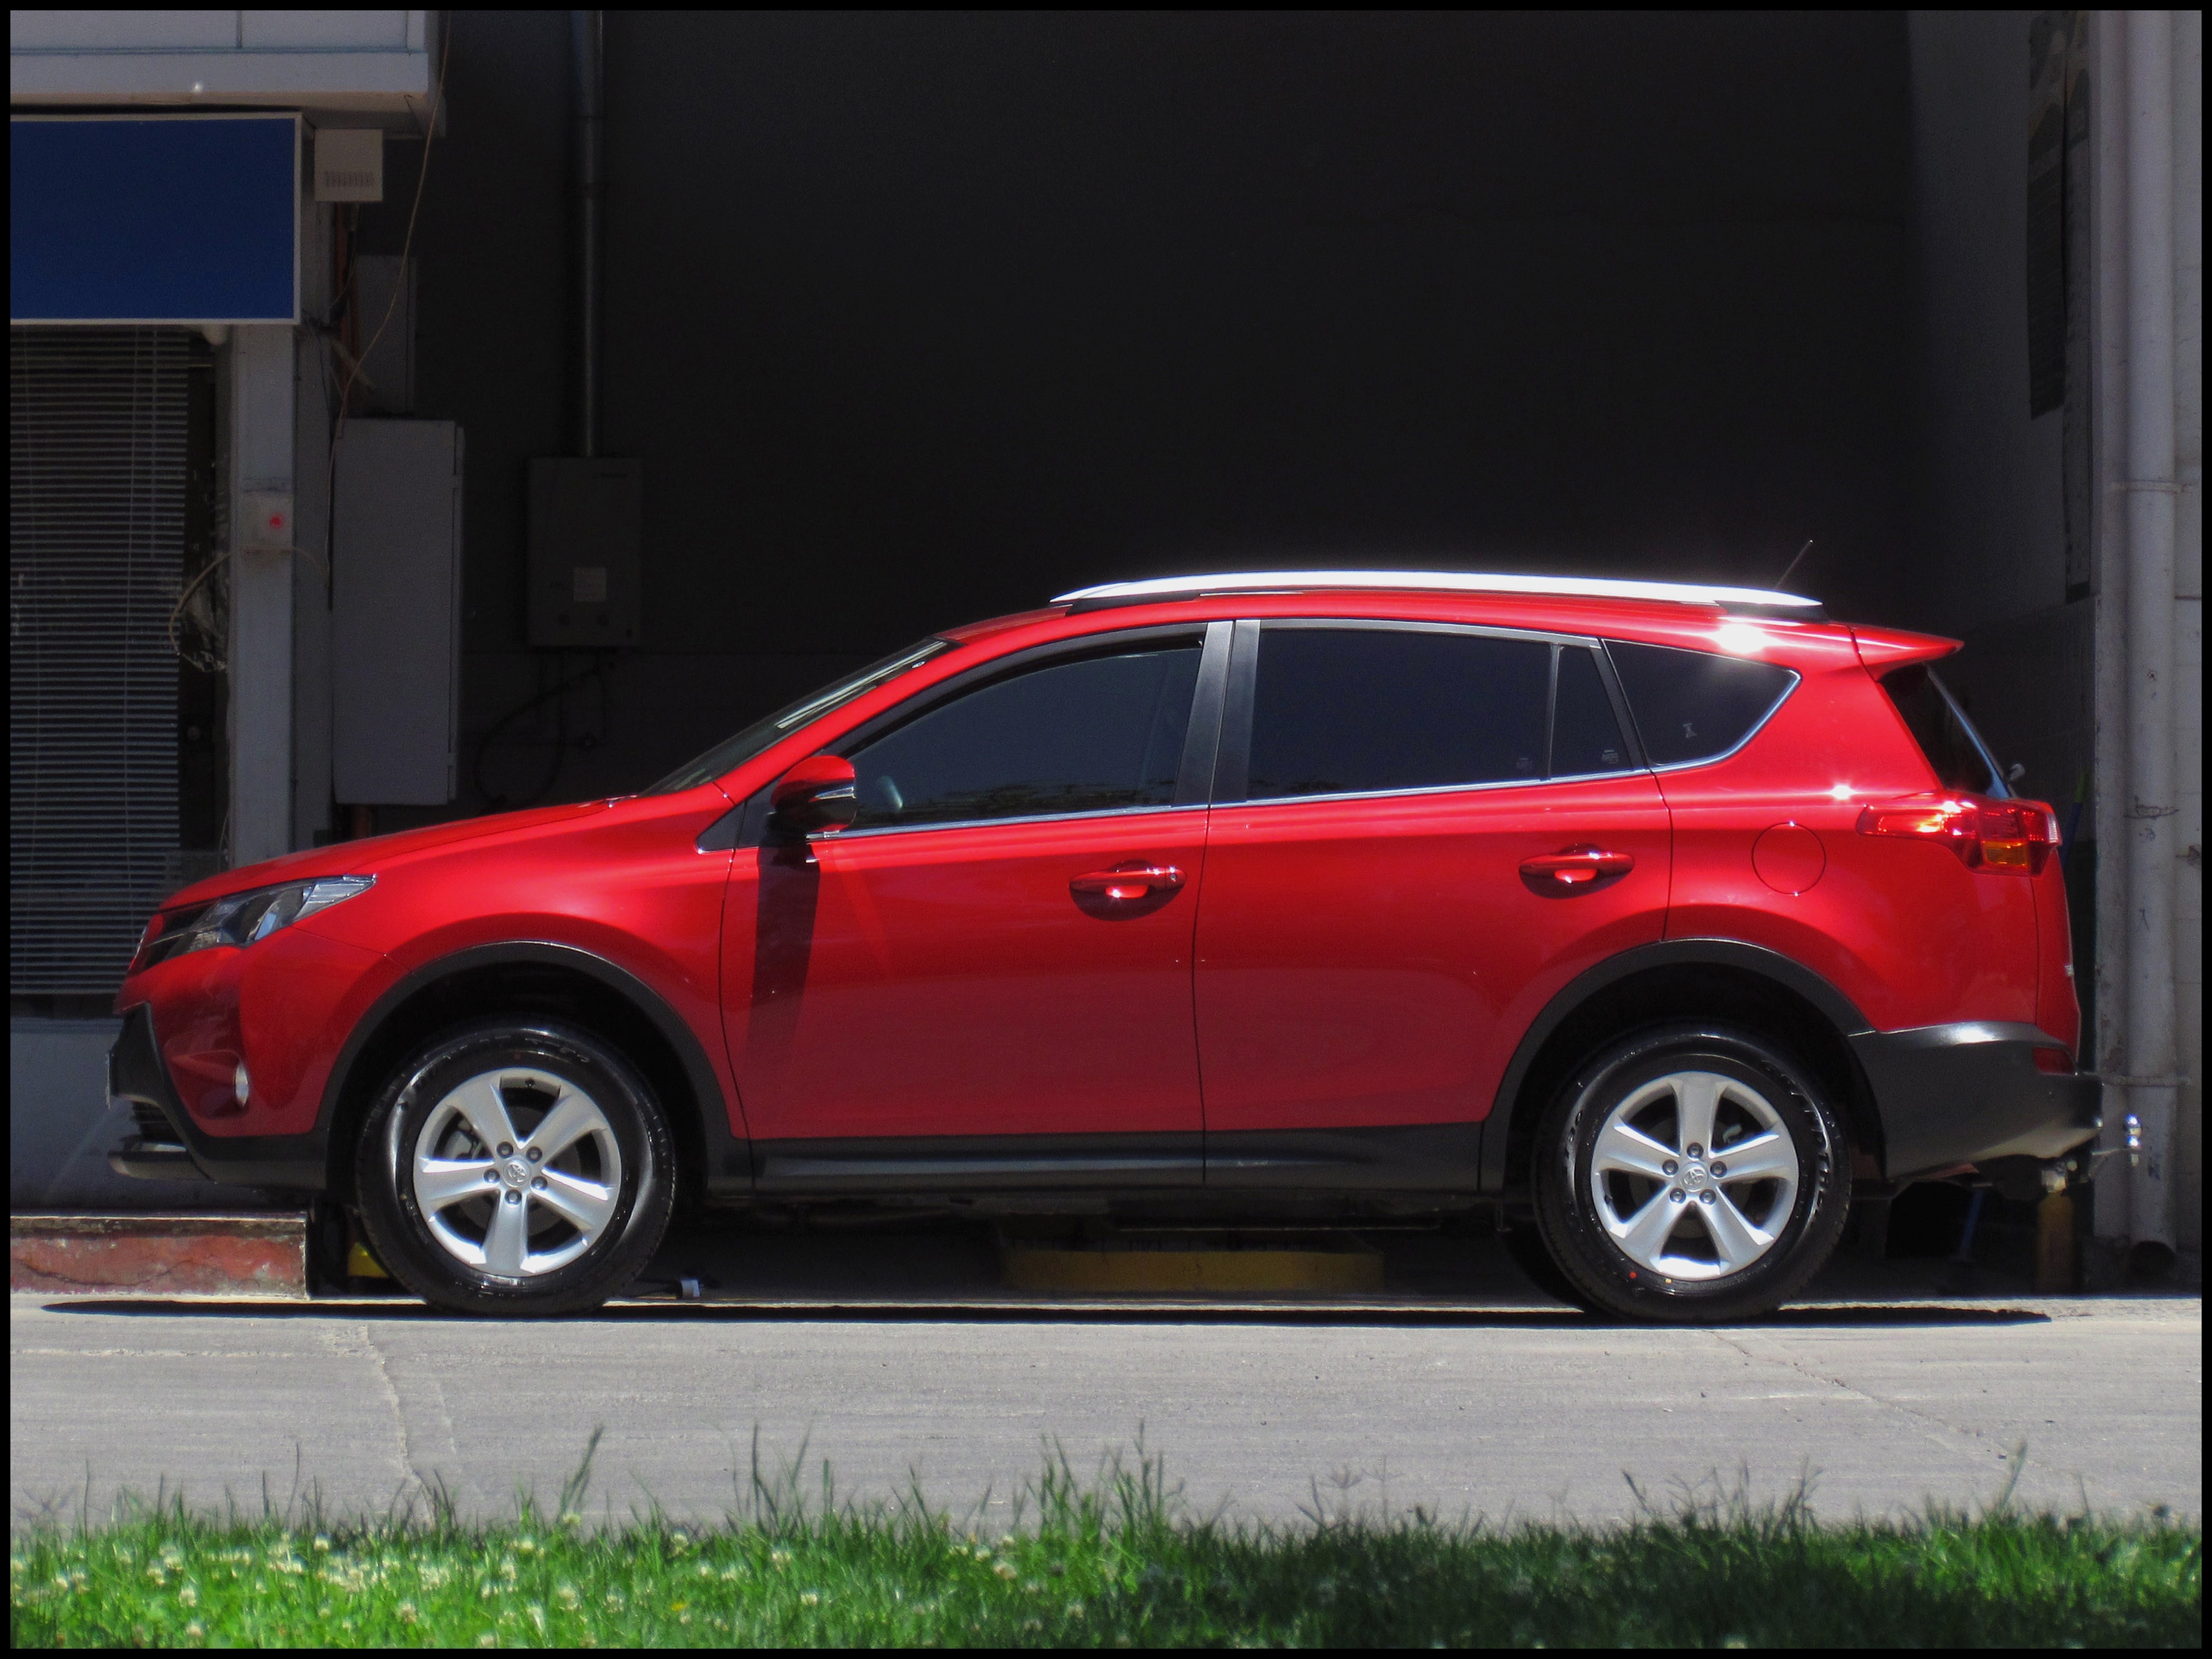 Best Gallery of Take A Look About 2007 Rav4 Mpg with Fascinating